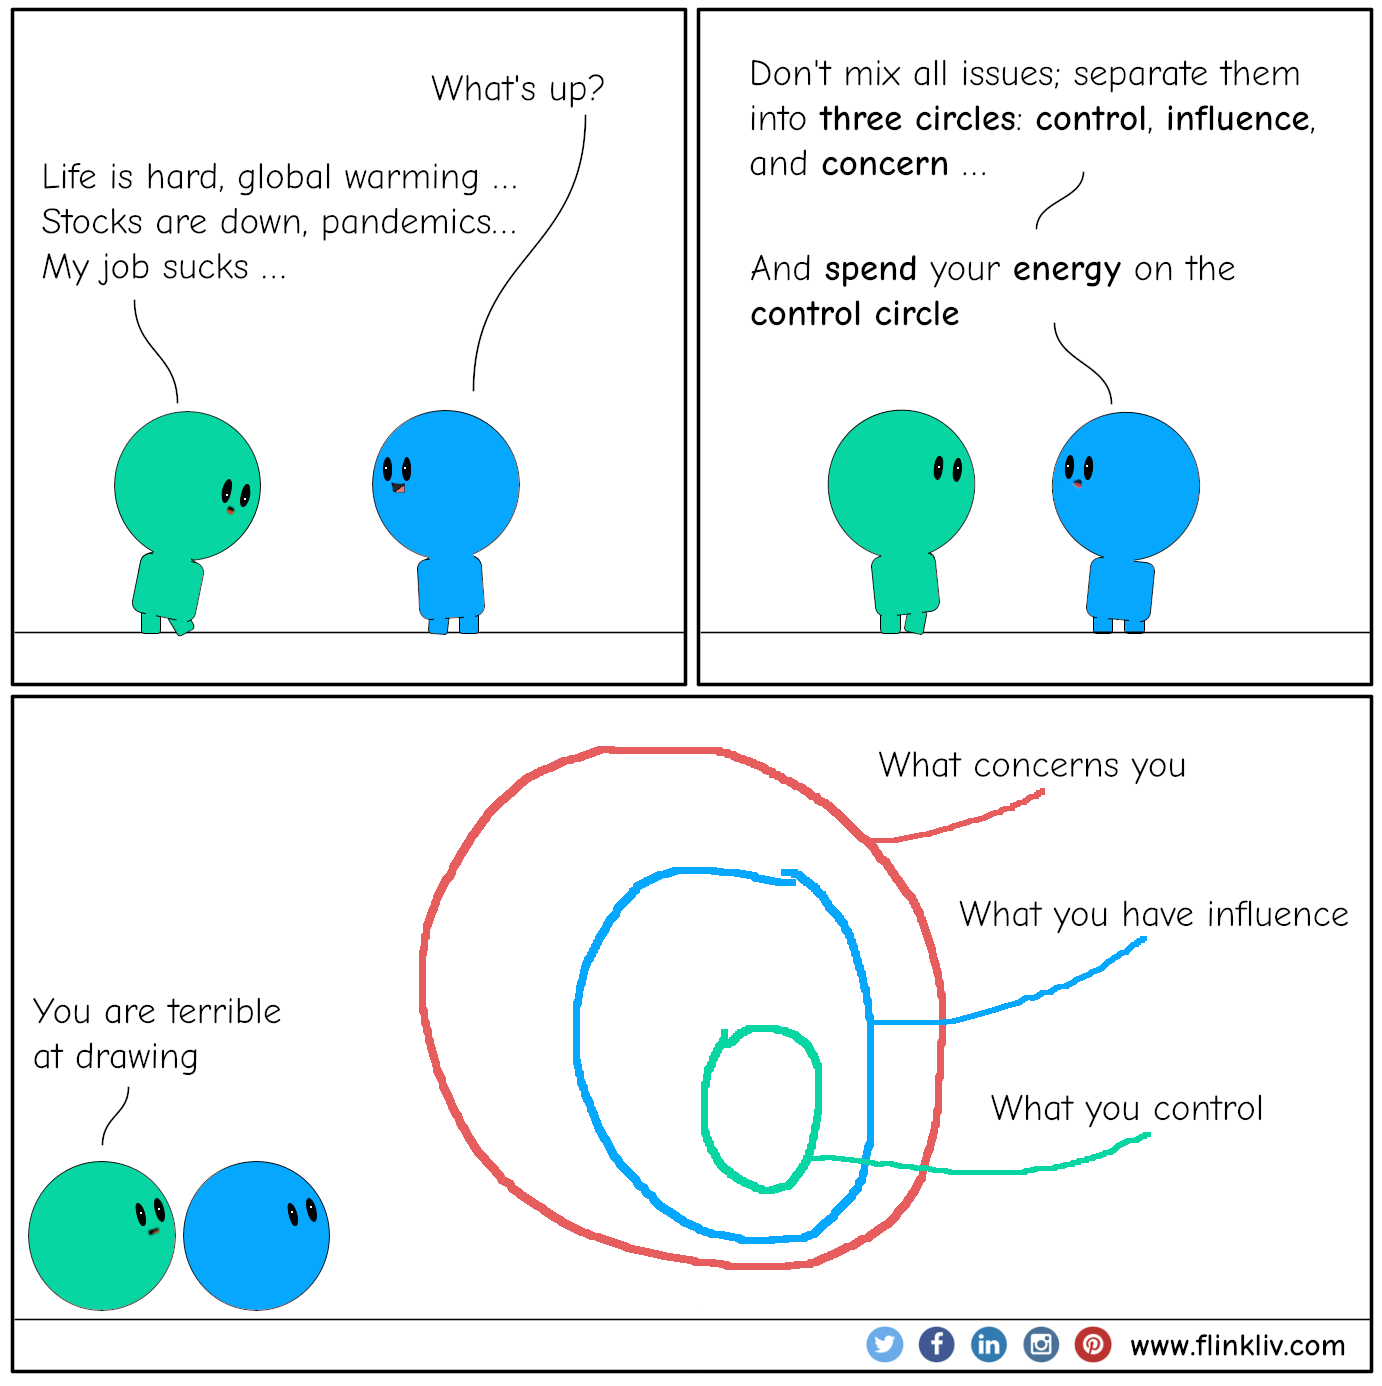 Conversation between A and B about the circle of influence. B:What's up? A:Life is hard, global warming, stocks are down, pandemics, my job sucks B:Don't mix all issues; separate them into three circles: control, influence, and concern. B:And spend your energy on the control circle. A:You are terrible at drawing By flinkliv.com